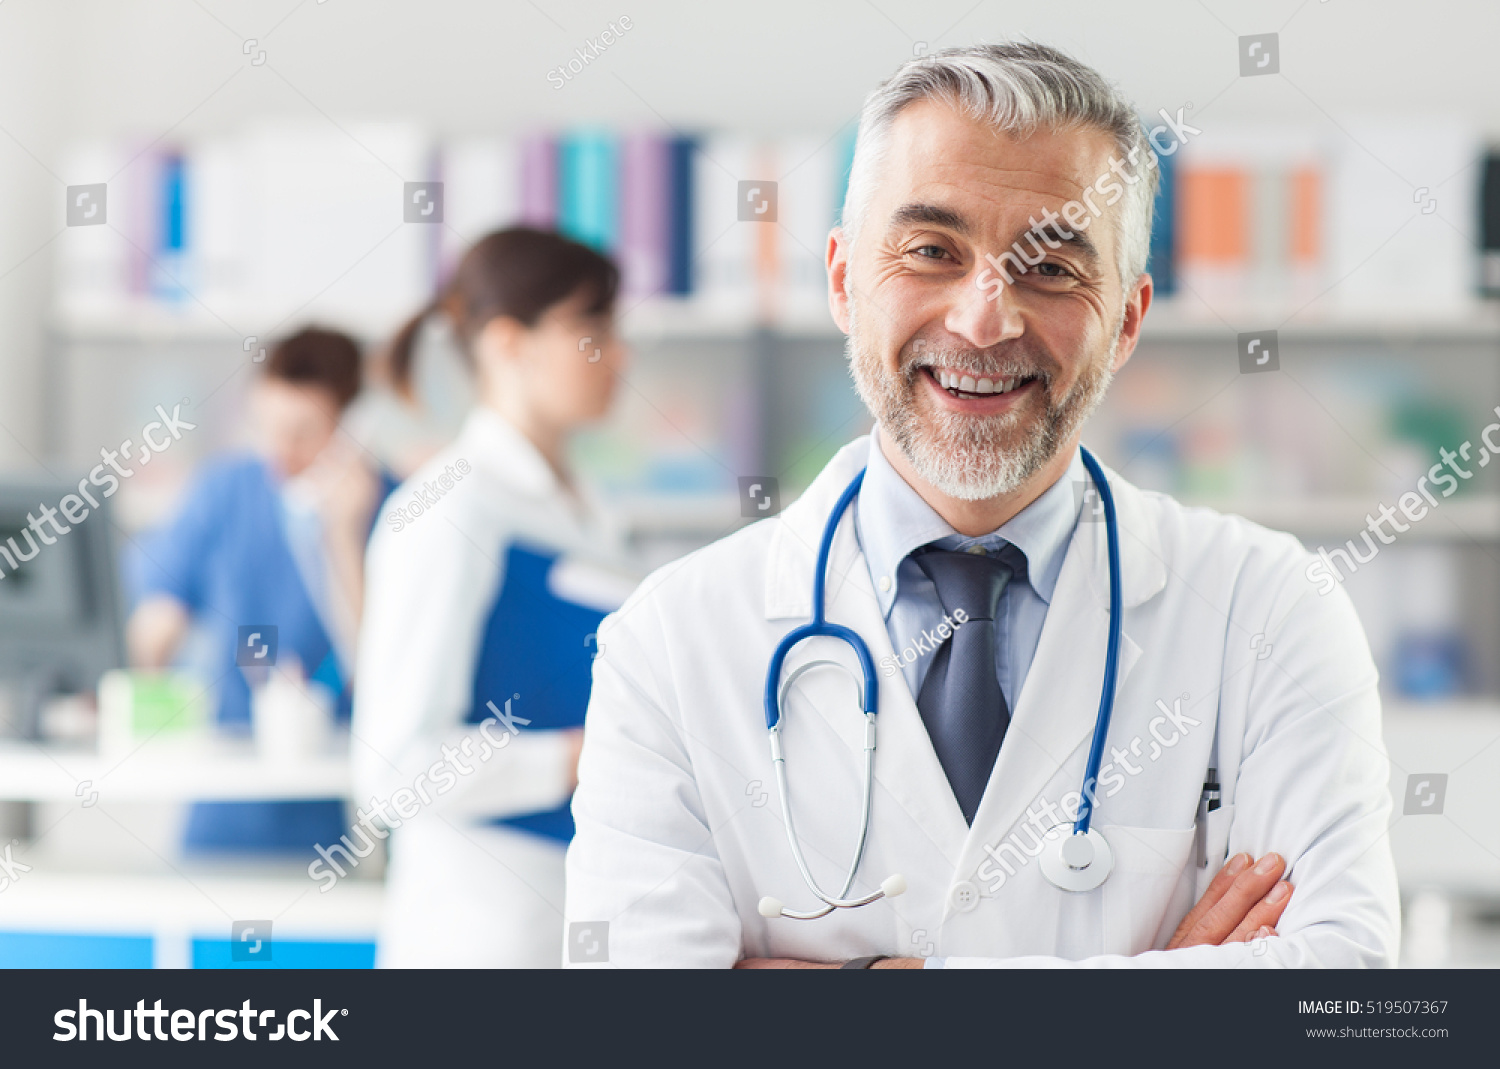 Smiling doctor posing with arms crossed in the office, he is wearing a stethoscope, medical staff on the background #519507367